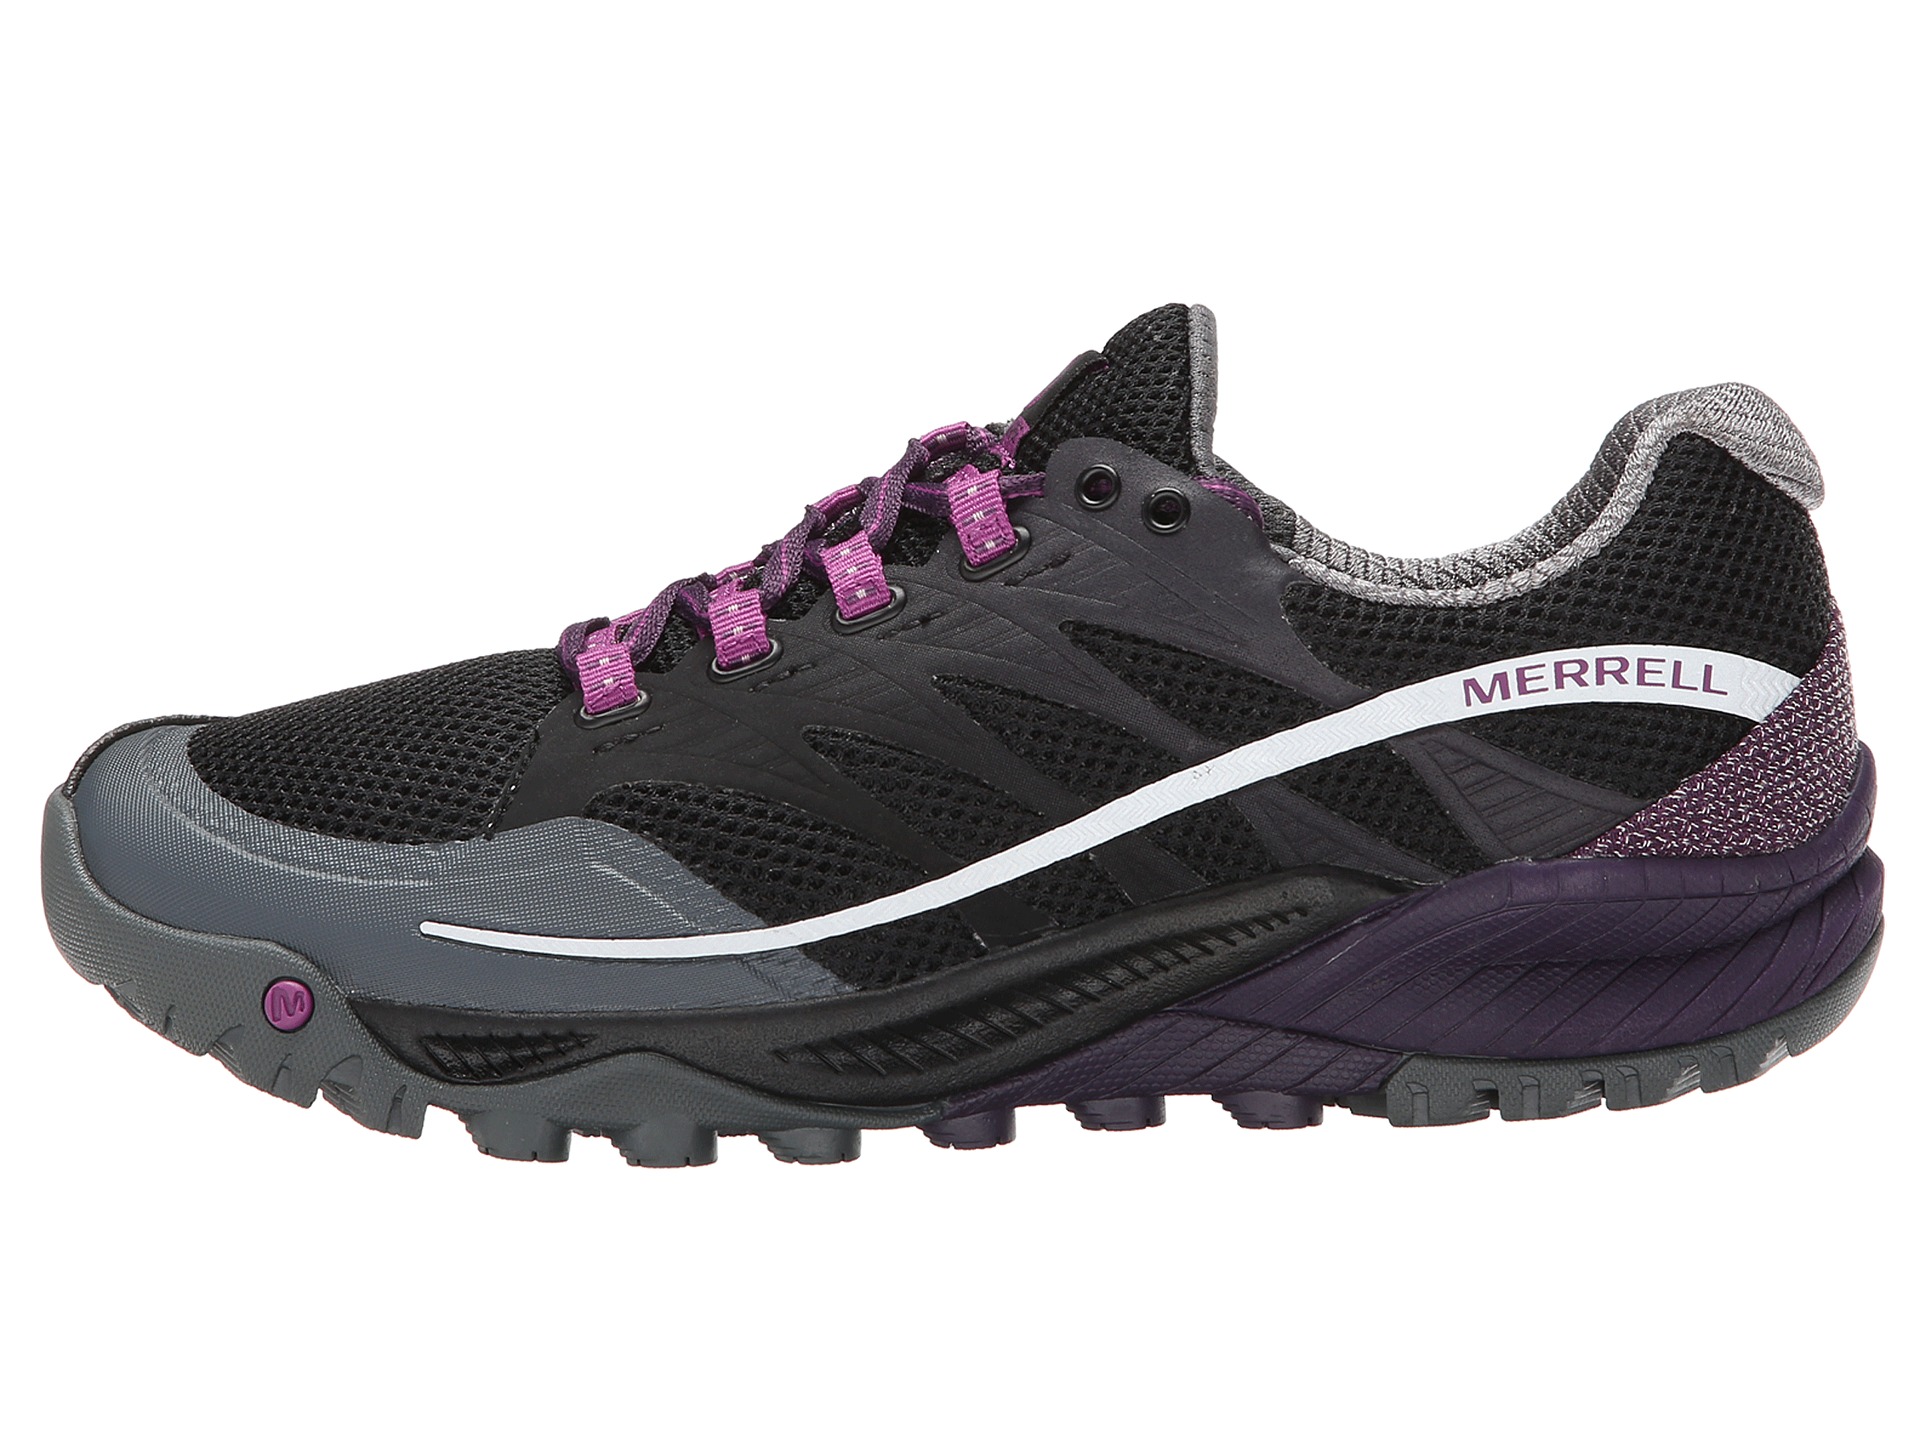 Merrell All Out Charge Wild Plum/Lime - Zappos.com Free Shipping BOTH Ways